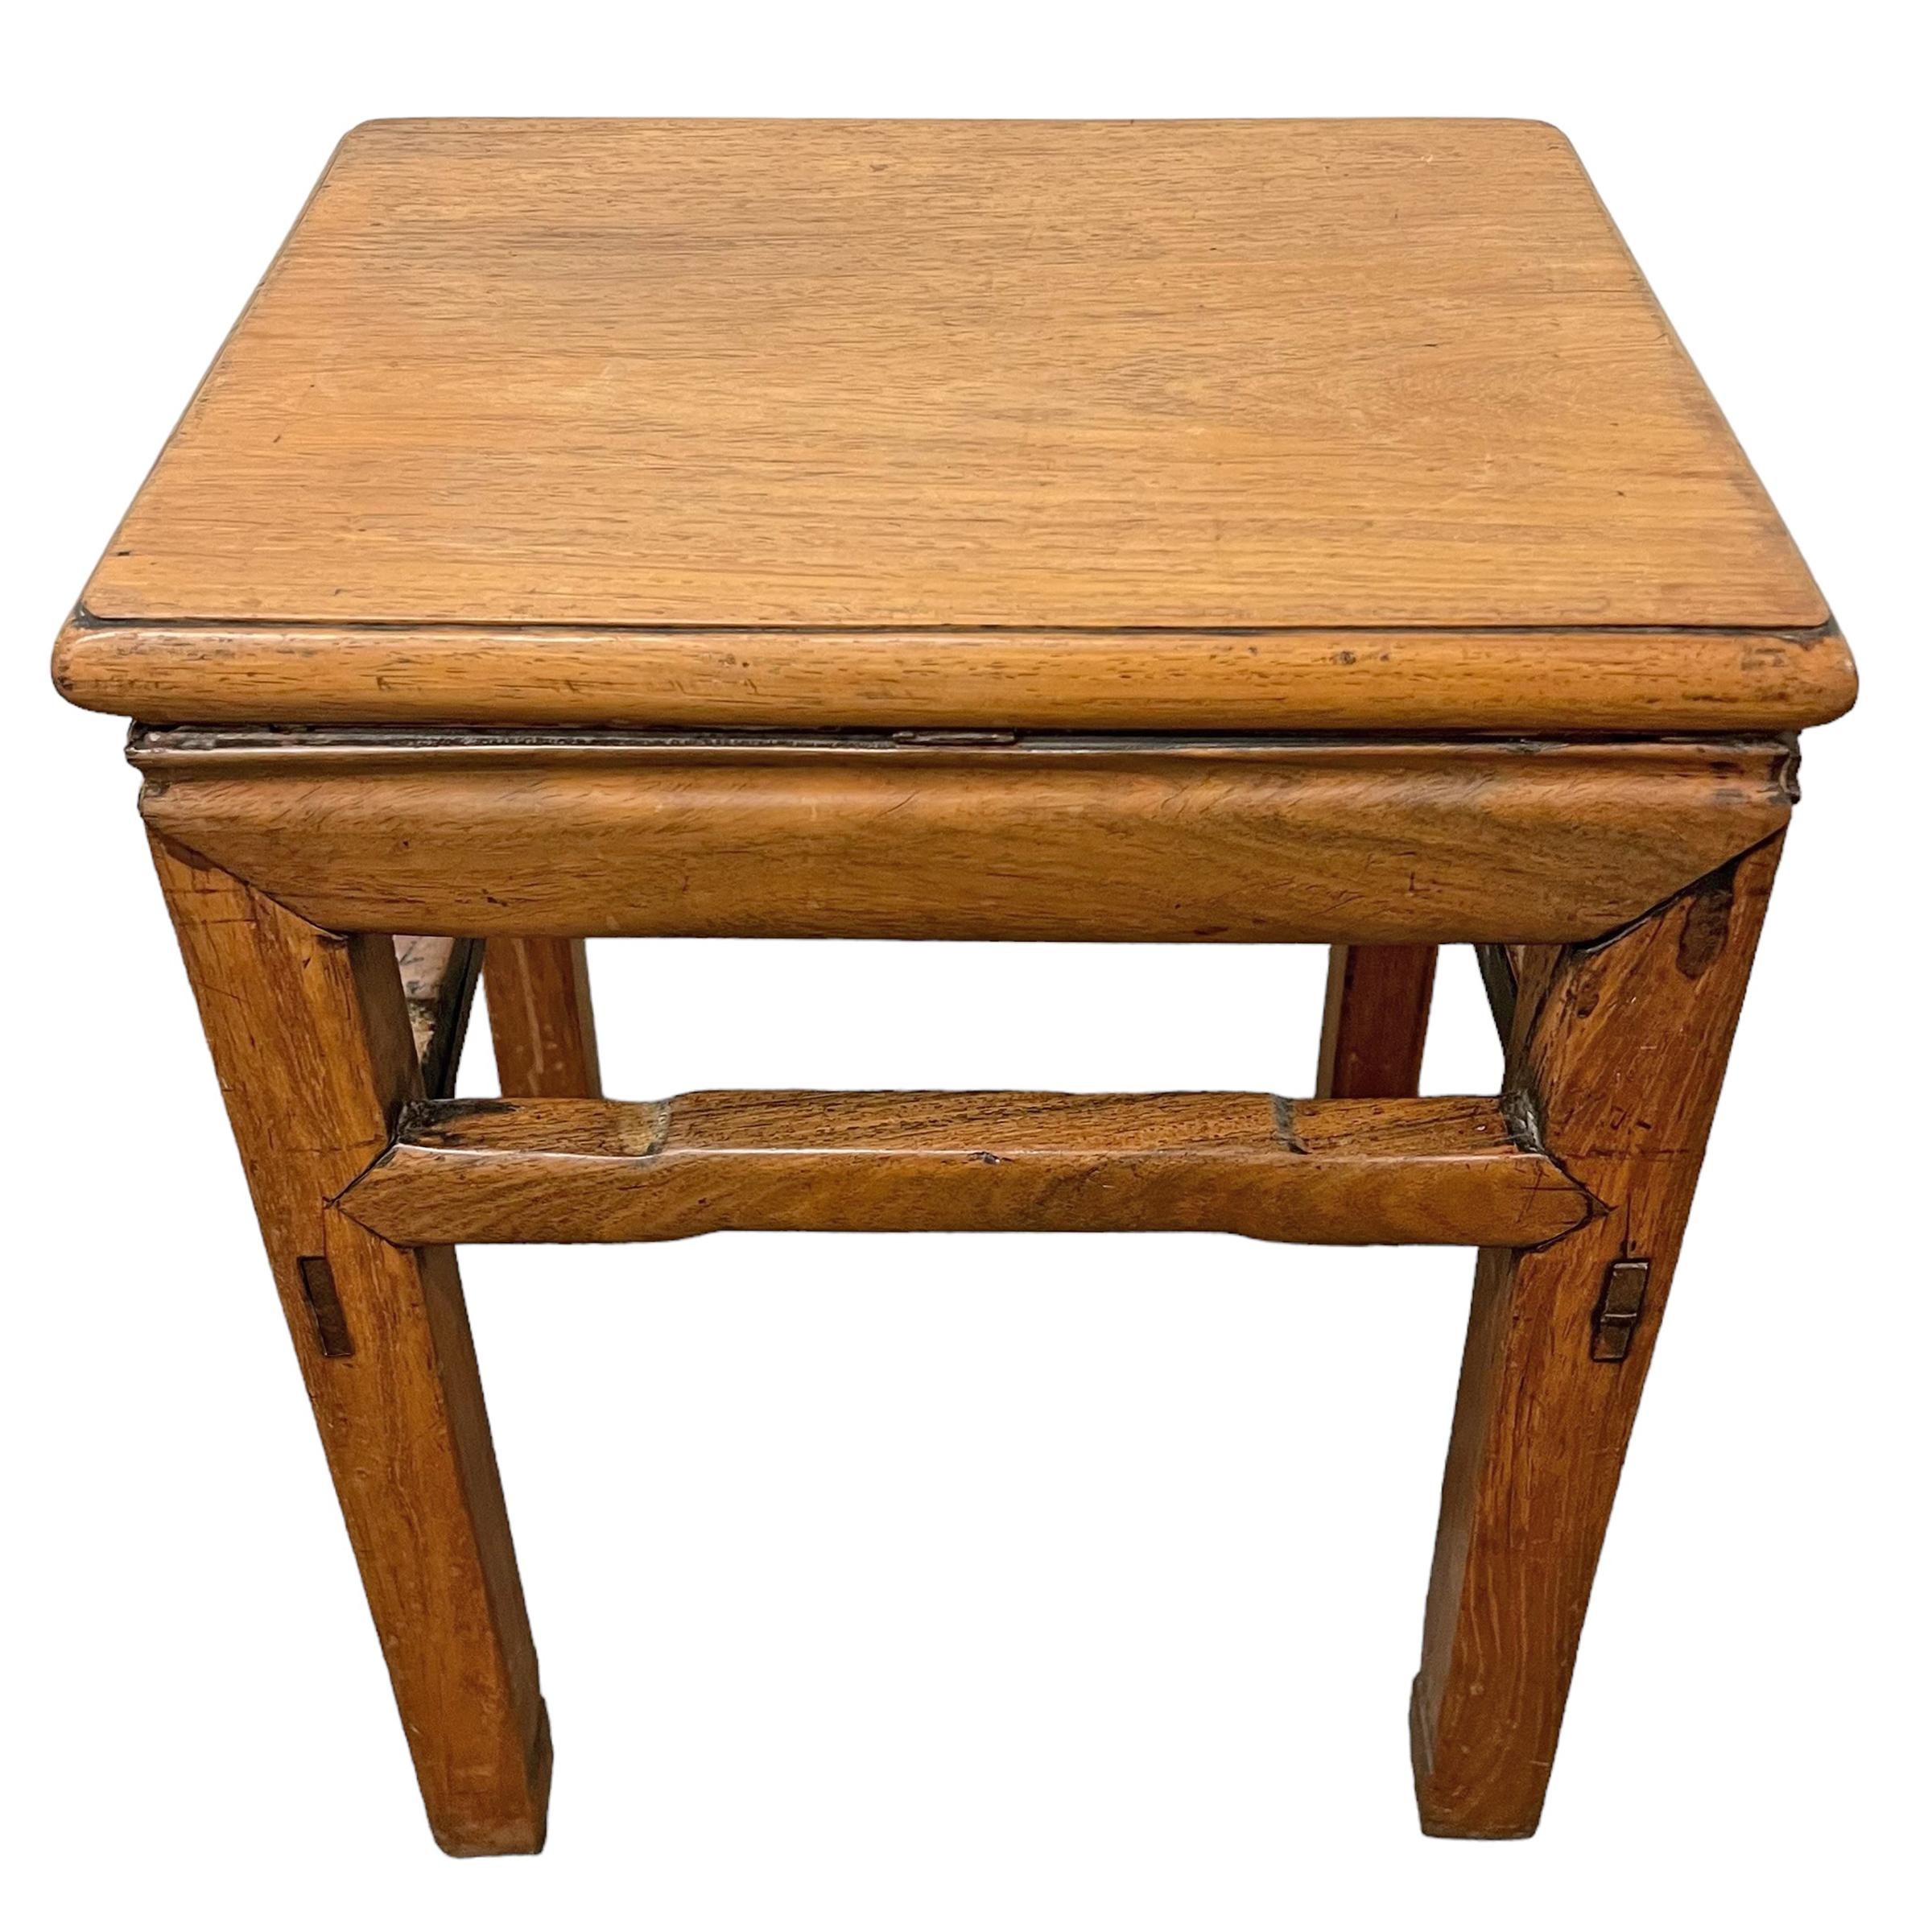 Hand-Crafted Late 17th/Early 18th Century Chinese Huanghuali Scholar's Stool For Sale